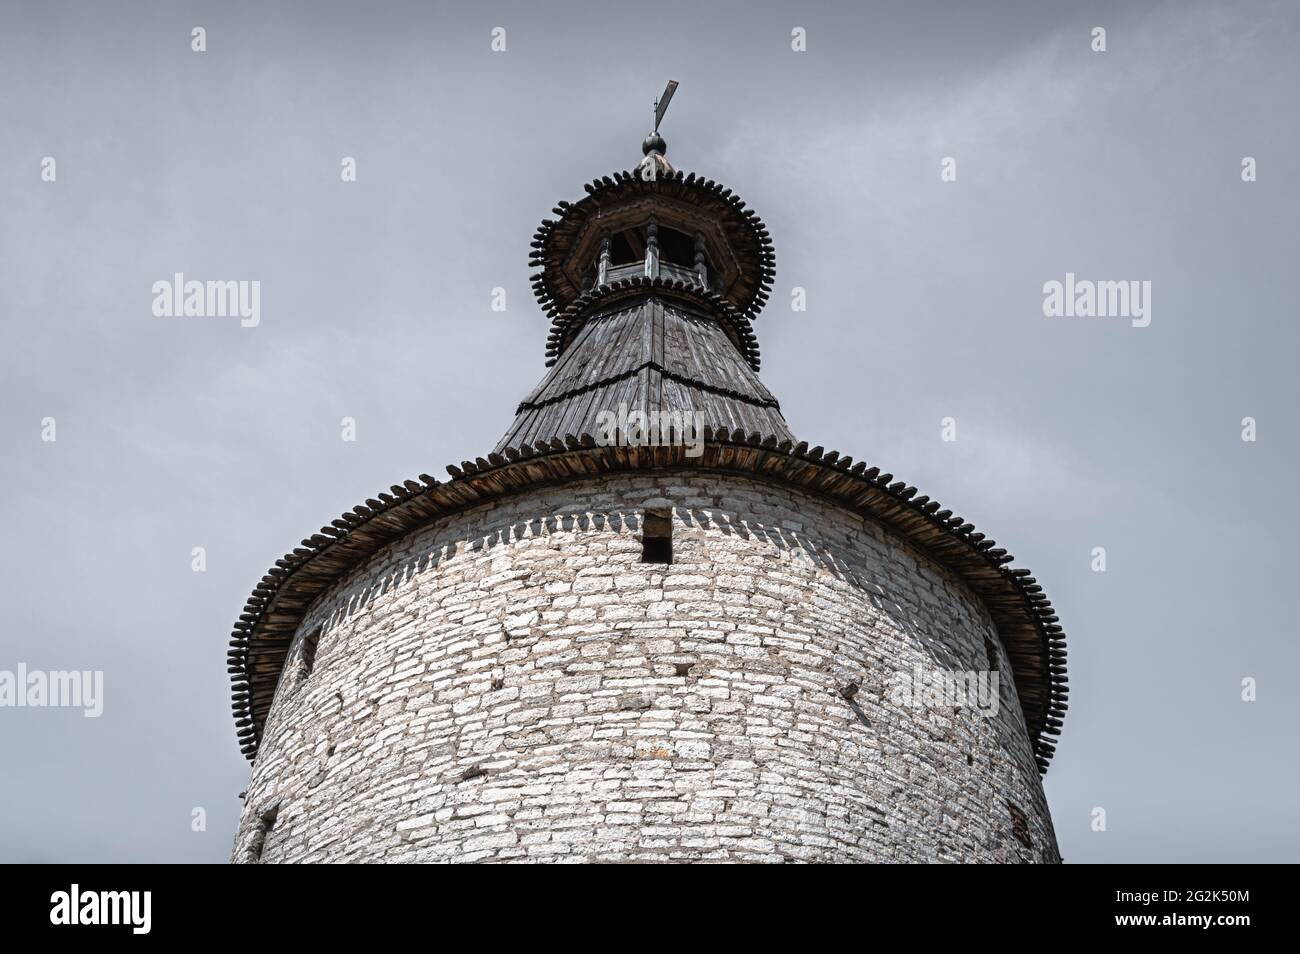 Ancient Kremlin watchtower in the city of Pskov, Russia. Stock Photo